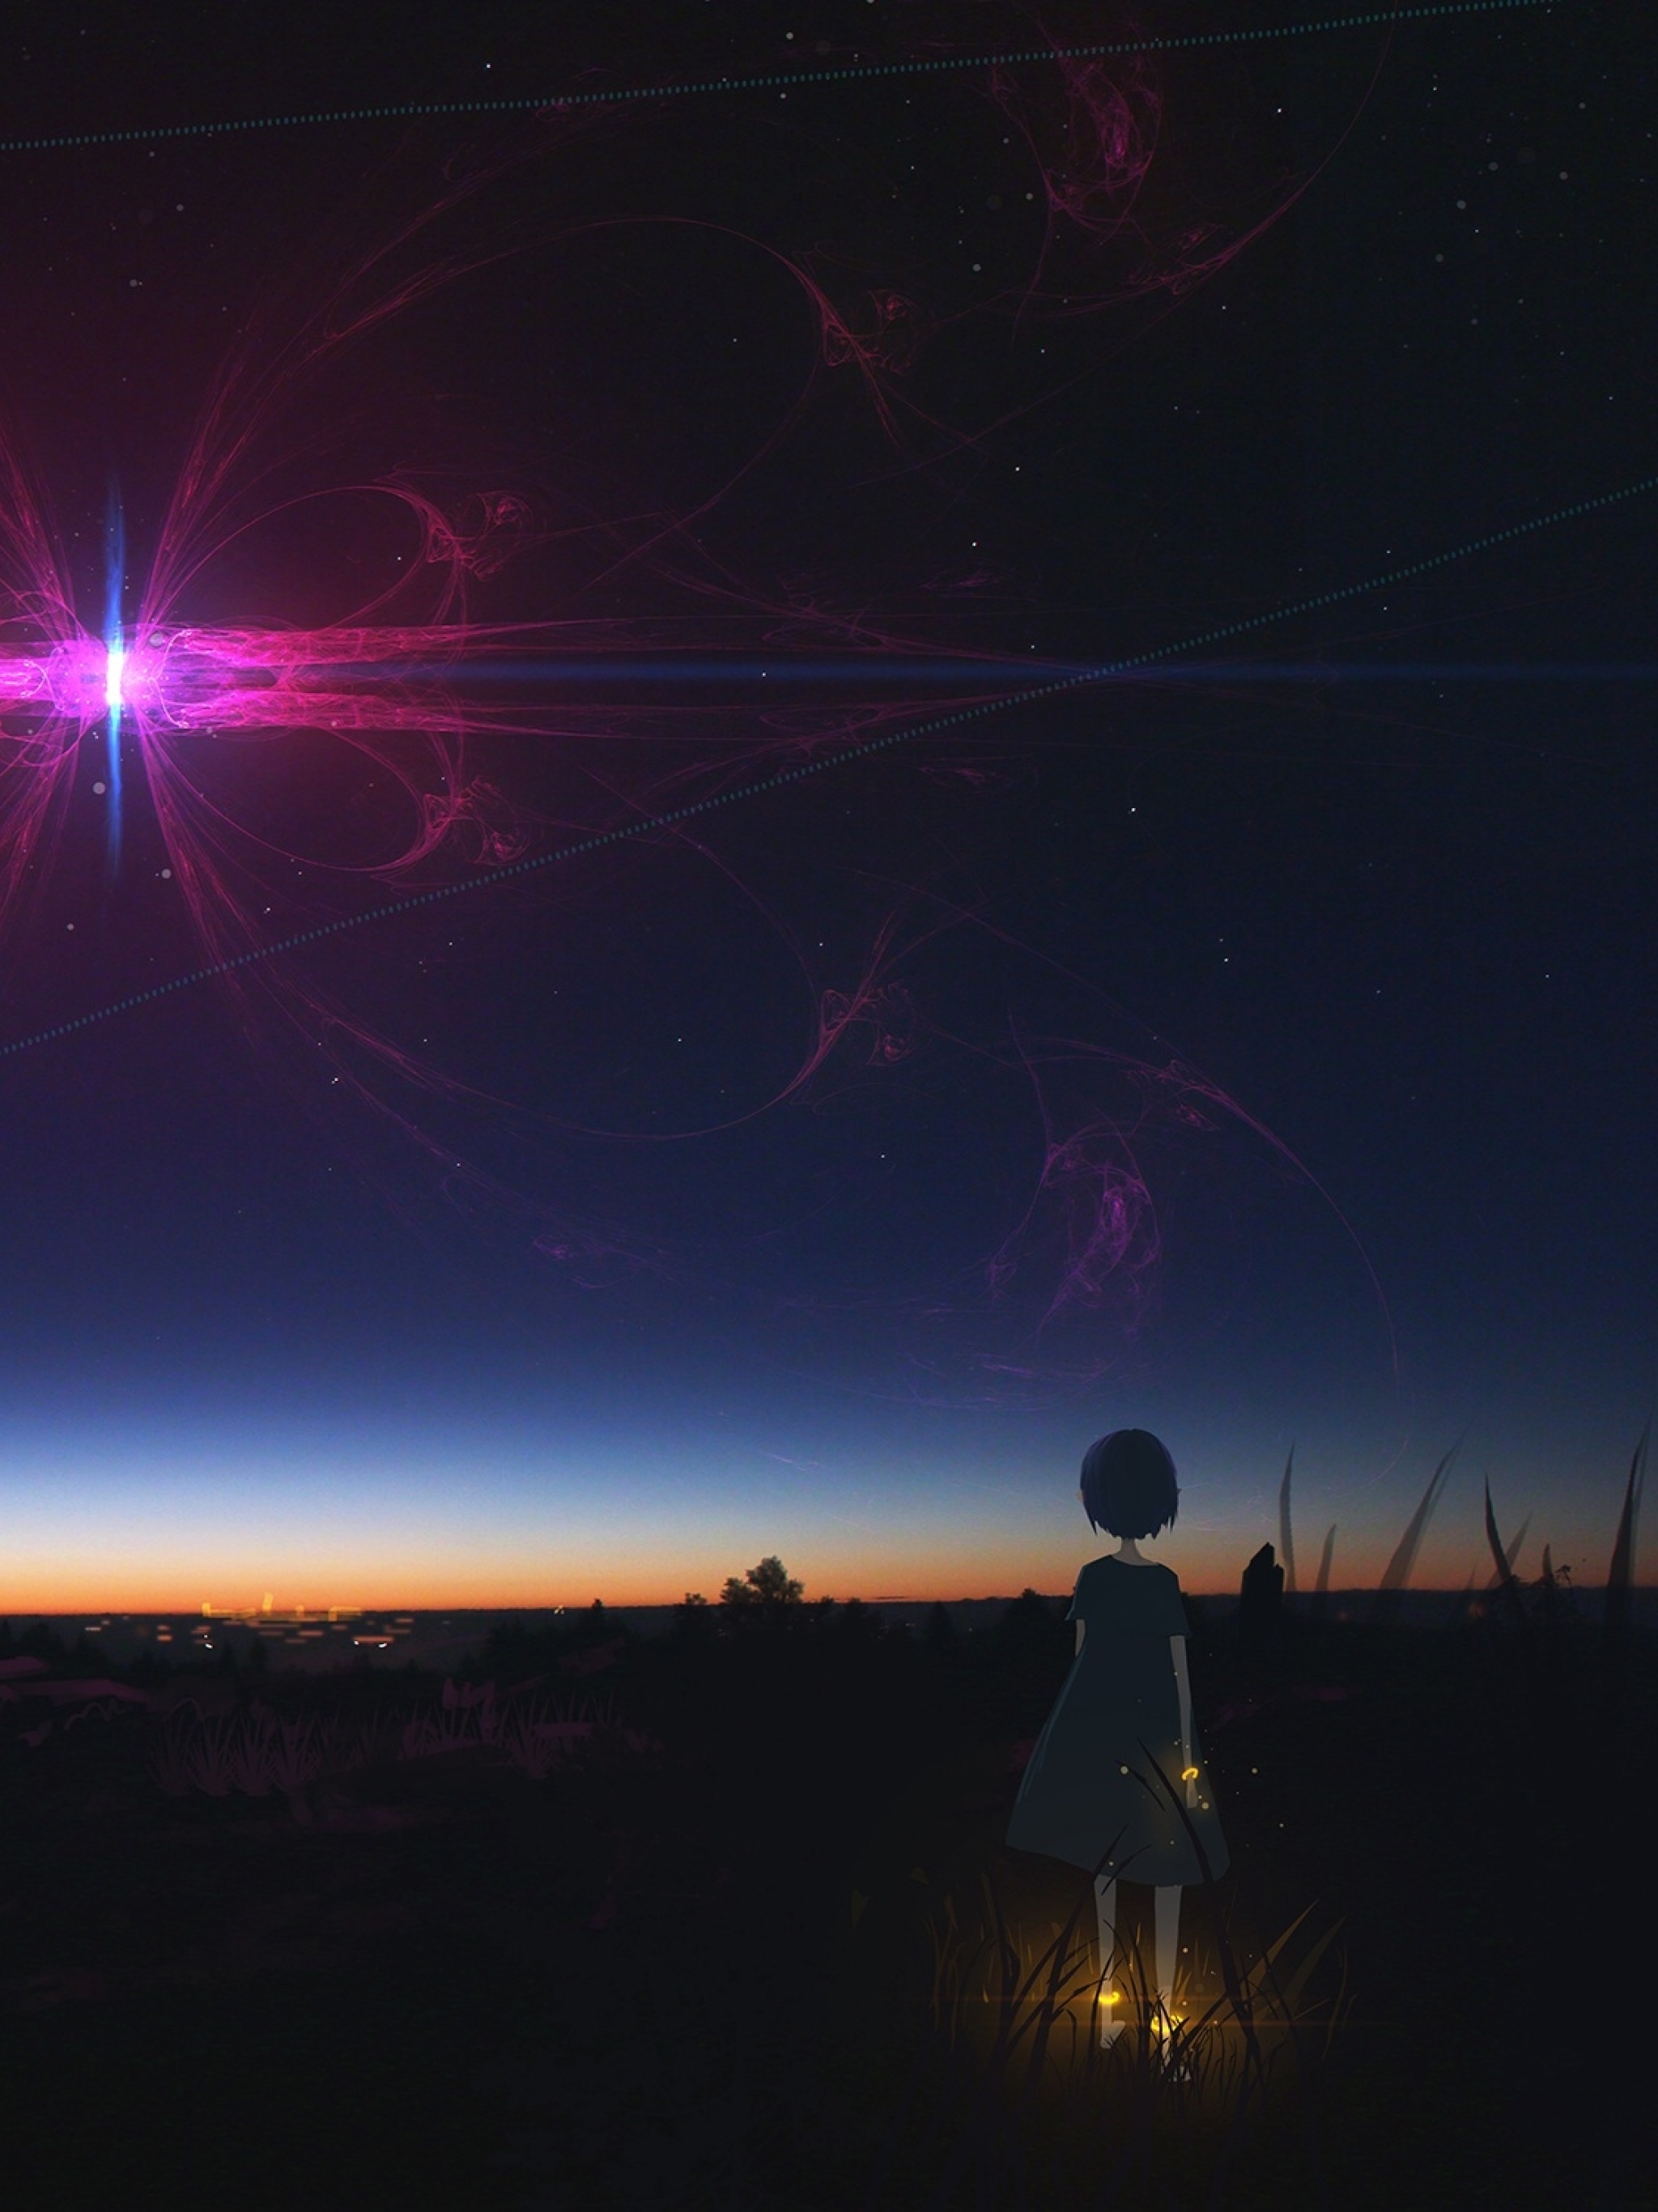 Download wallpaper 1366x768 girl, night, starry sky, anime tablet, laptop  hd background